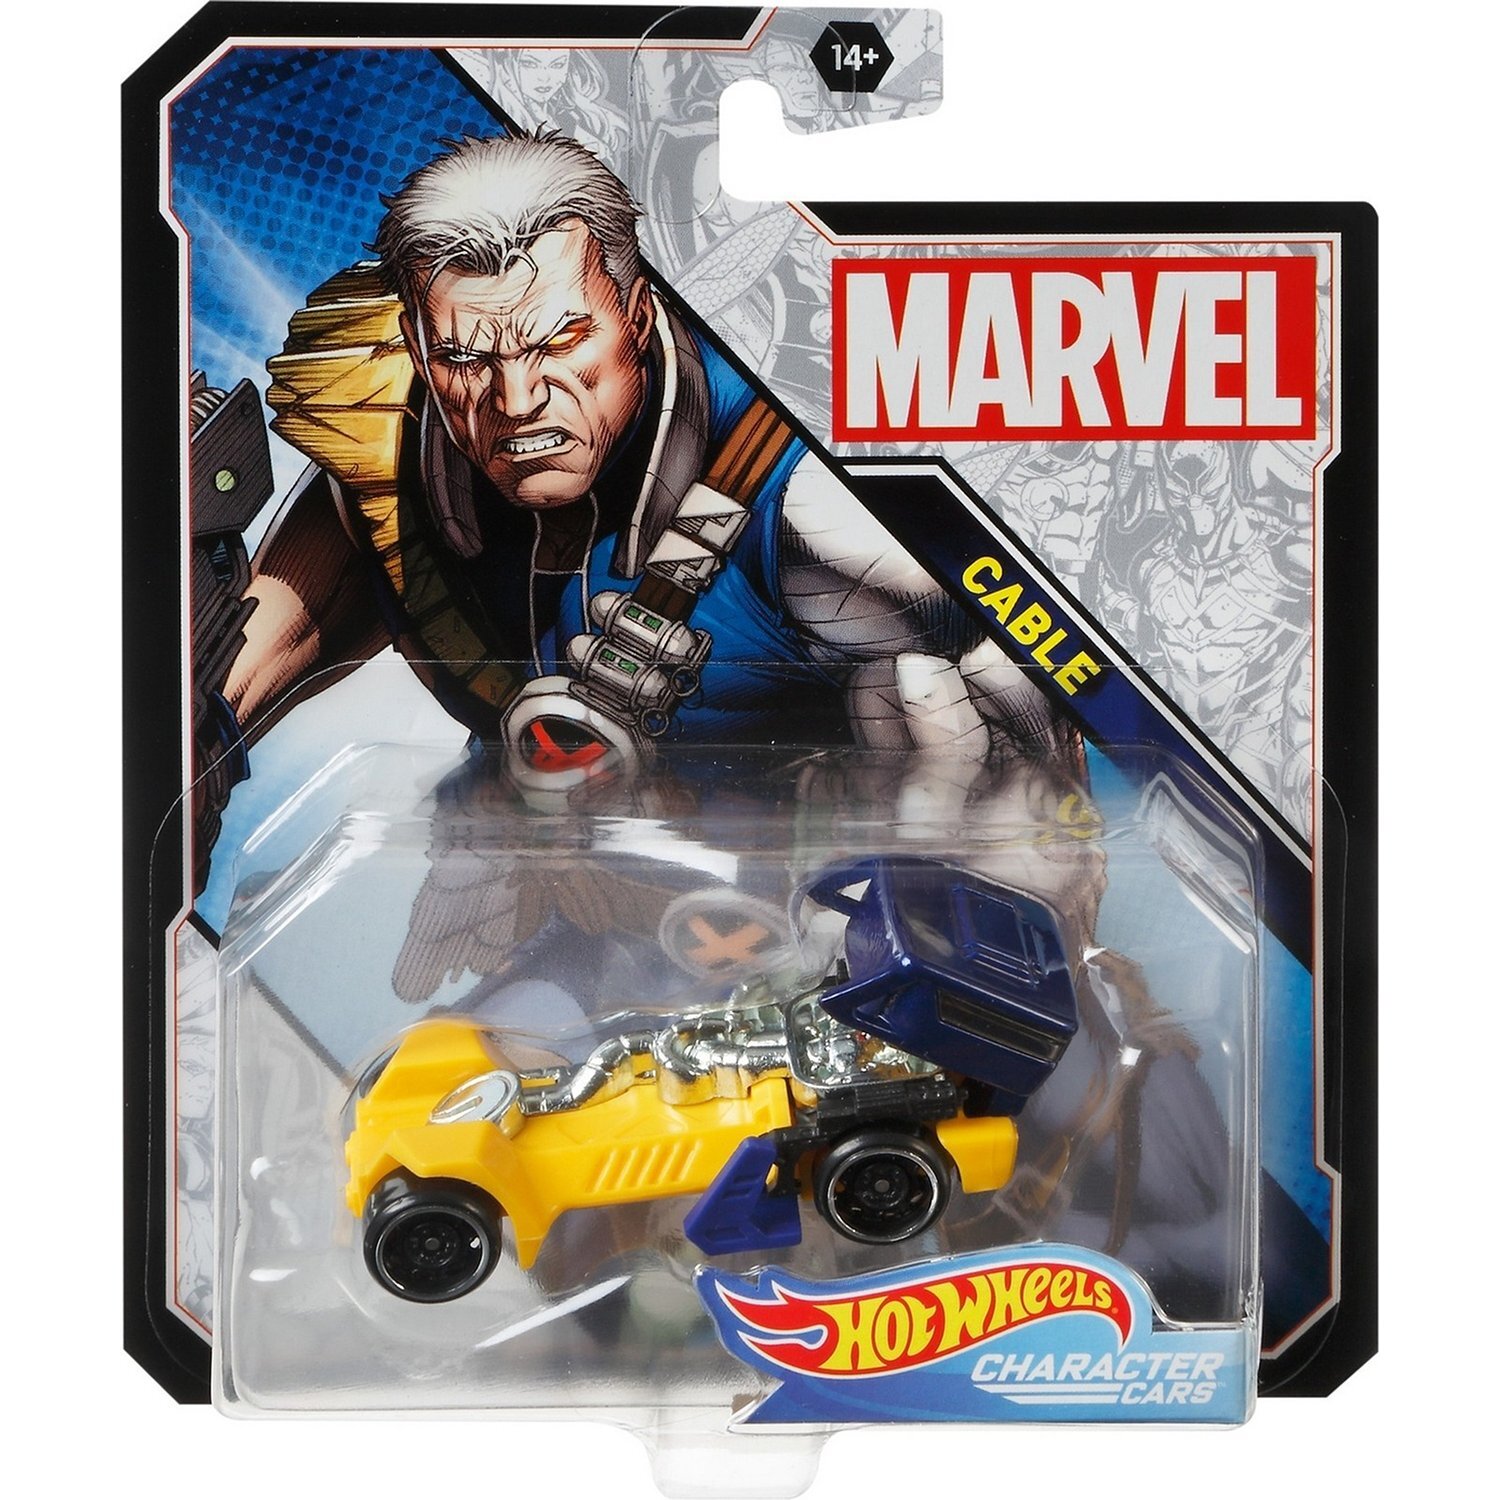 SALE WB1 Cable 2019 Hot Wheels MARVEL Character Cars Case M